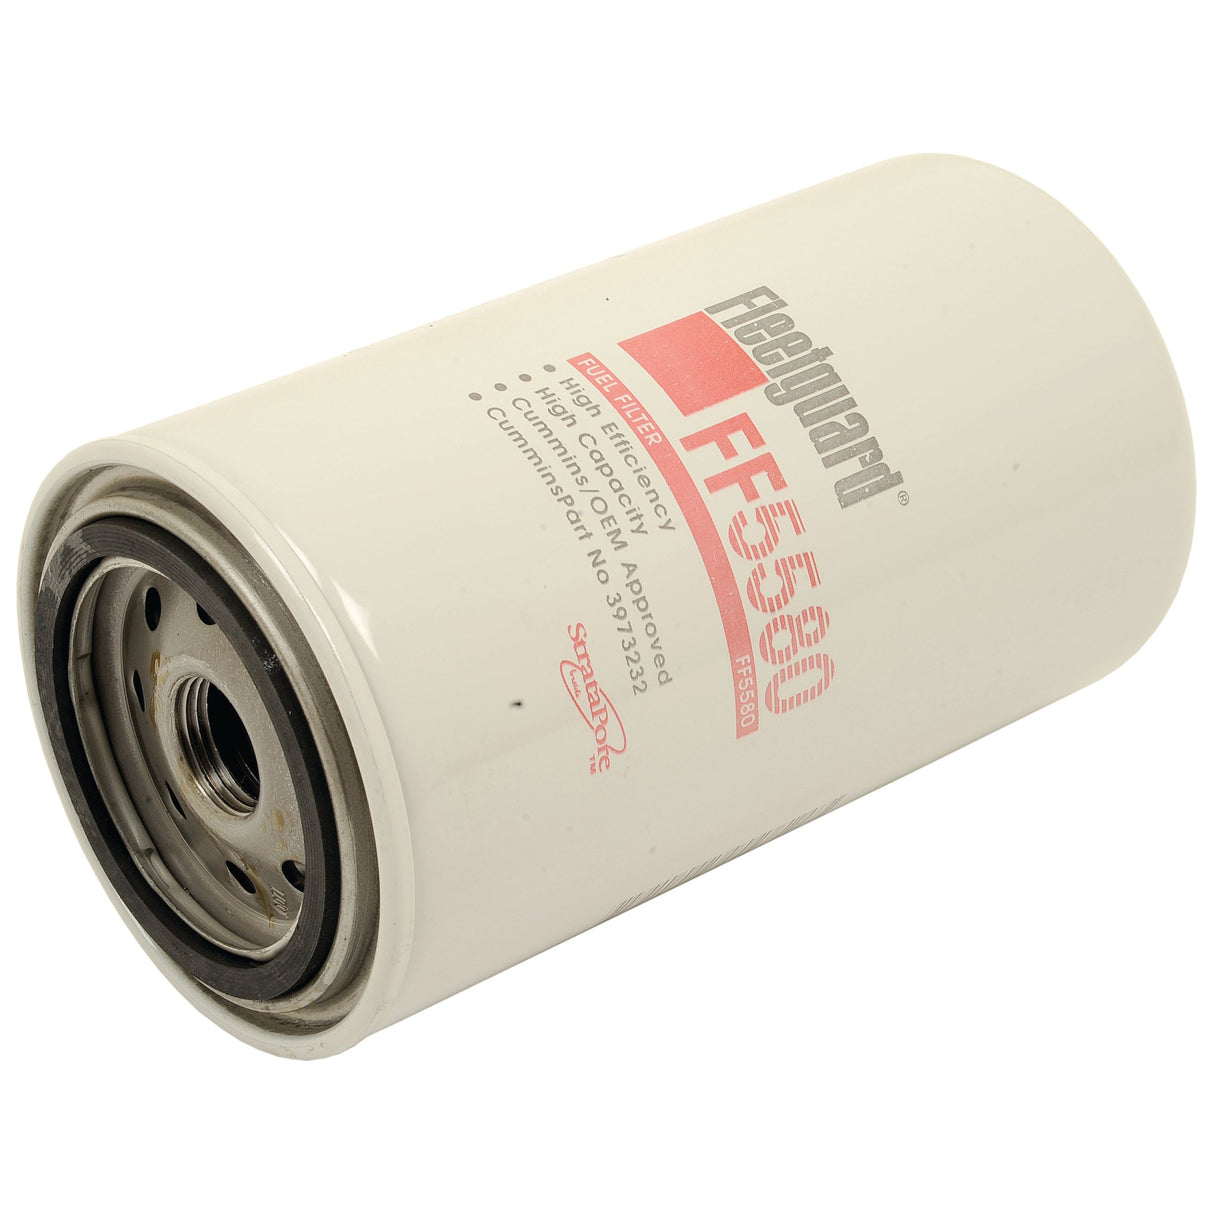 Fuel Filter - Spin On - FF5580
 - S.67929 - Farming Parts